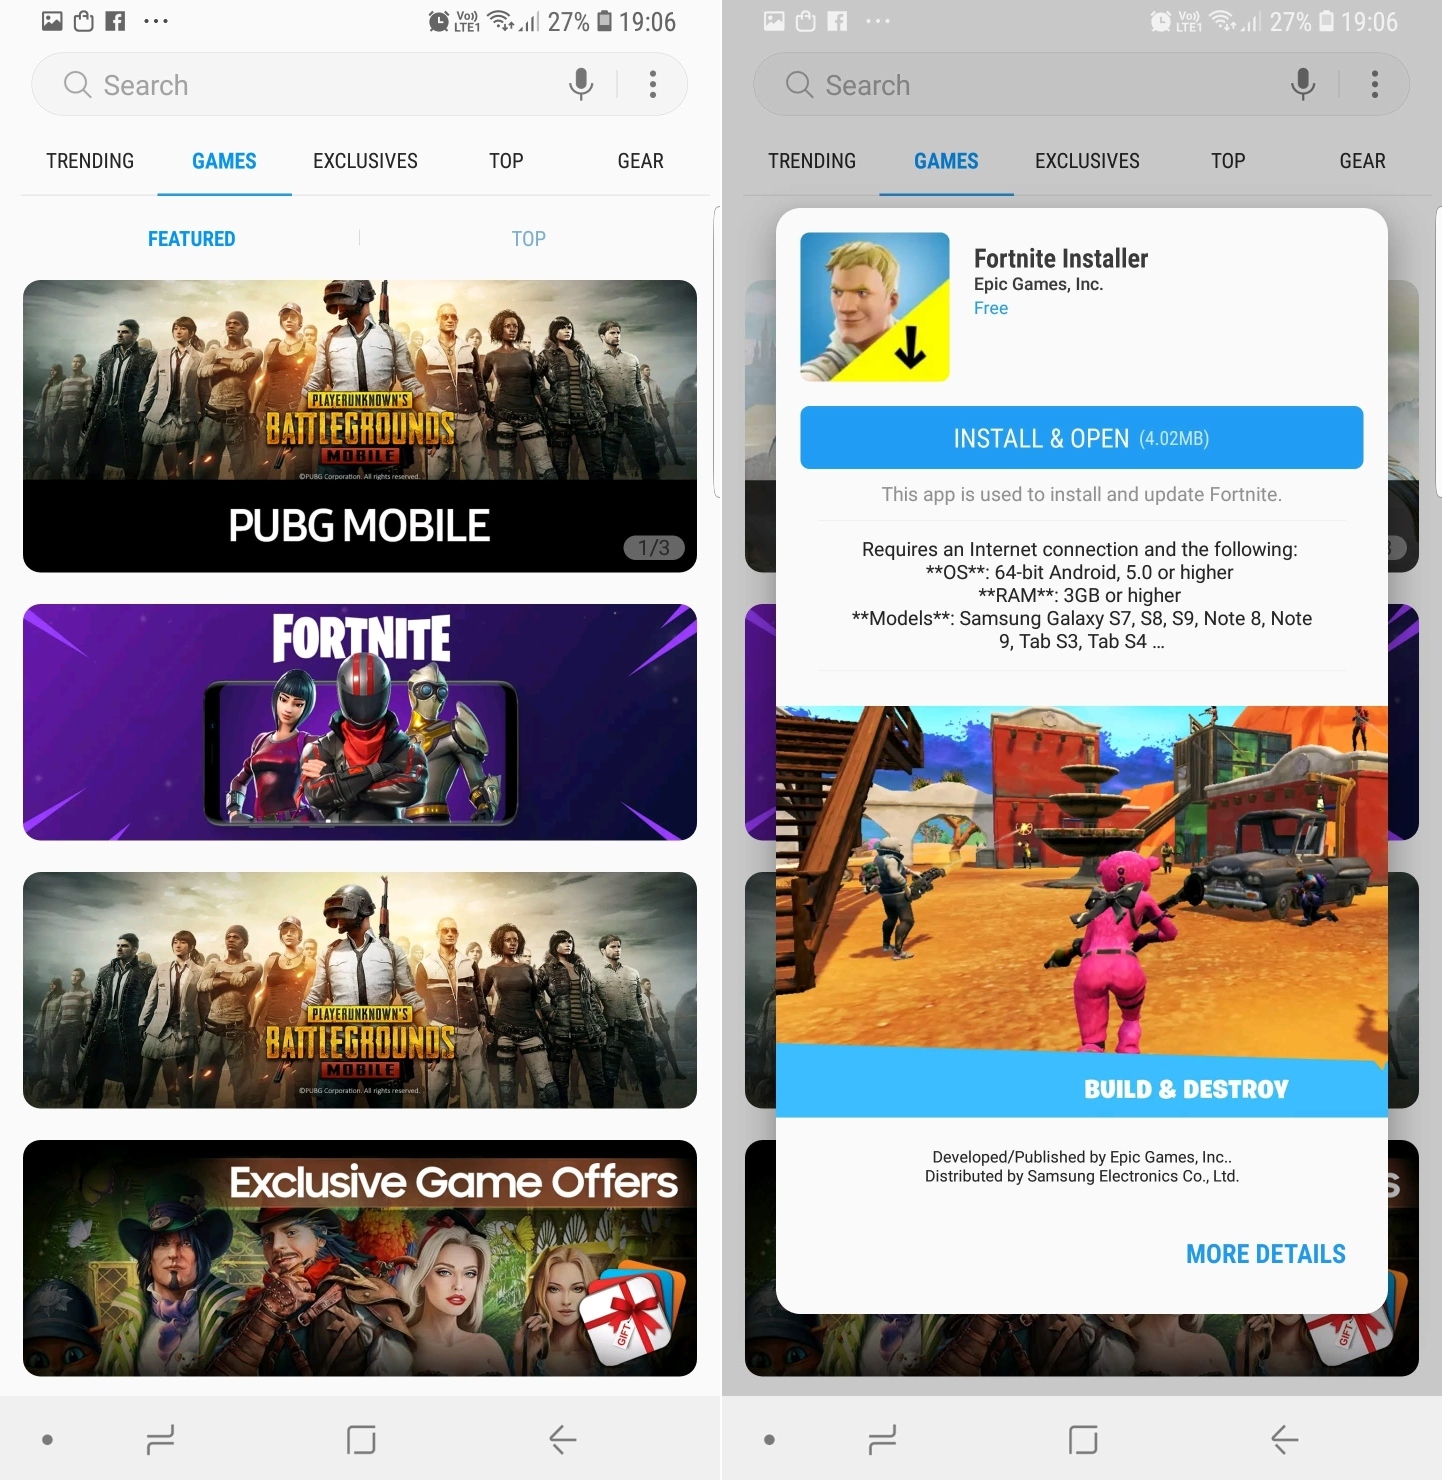 you can t see the banner just click this link on your phone or tablet to directly go to the fortnite page in galaxy apps and press the install button - fortnite mobile installer epic games